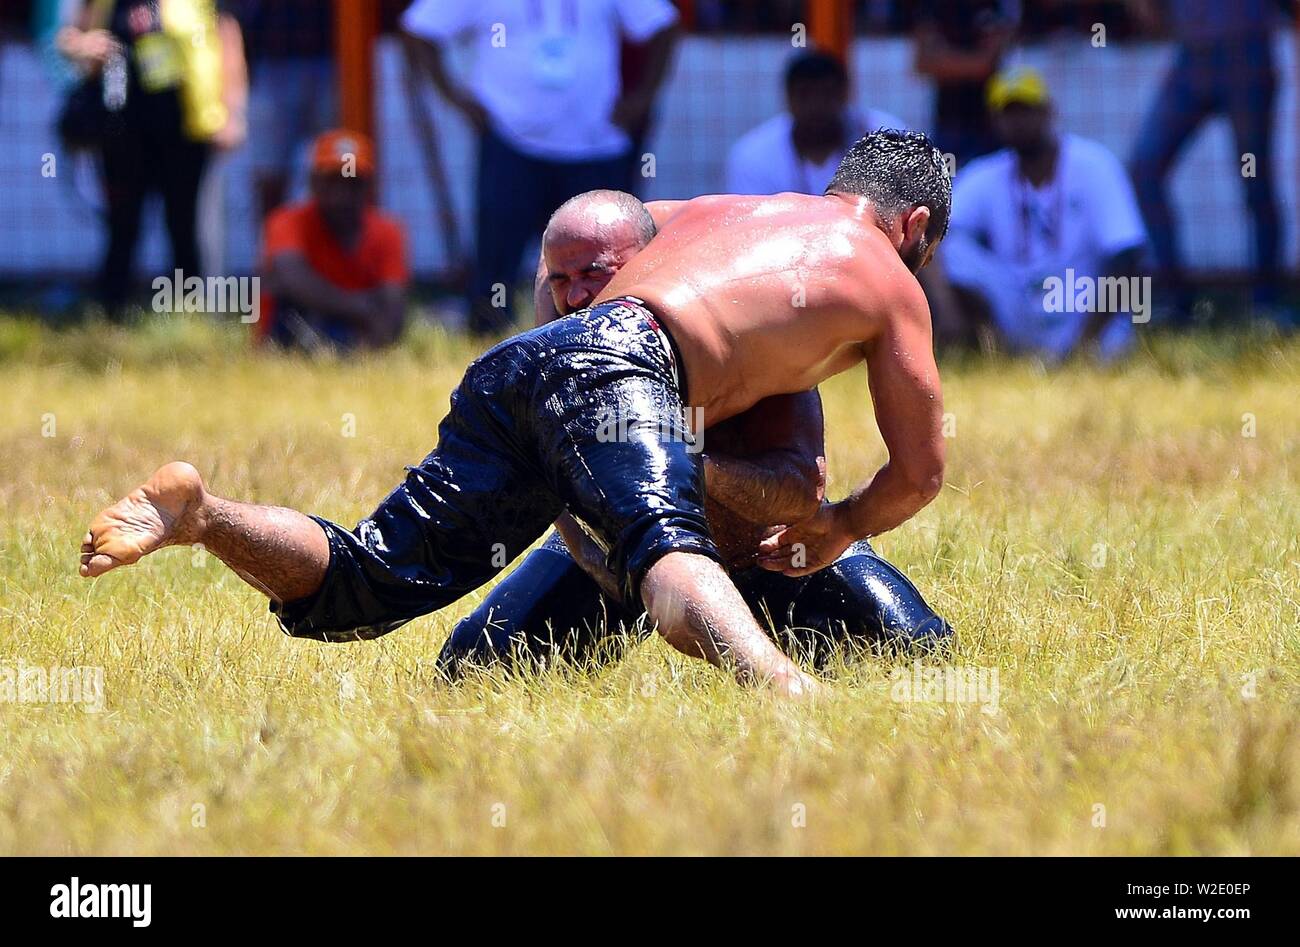 Ankara, Turkey. 7th July, 2019. Wrestlers compete during the traditional Kirkpinar Oil Wrestling Festival in Edirne, Turkey, July 7, 2019. Turkey's Kirkpinar Oil Wrestling Festival is a centuries-old traditional sport event, in which sportsmen covered with olive oil compete to win a prestigious golden belt. TO GO WITH Feature: Turkey braces for major traditional oil wrestling tournament. Credit: Ihlas News Agency/Xinhua/Alamy Live News Stock Photo